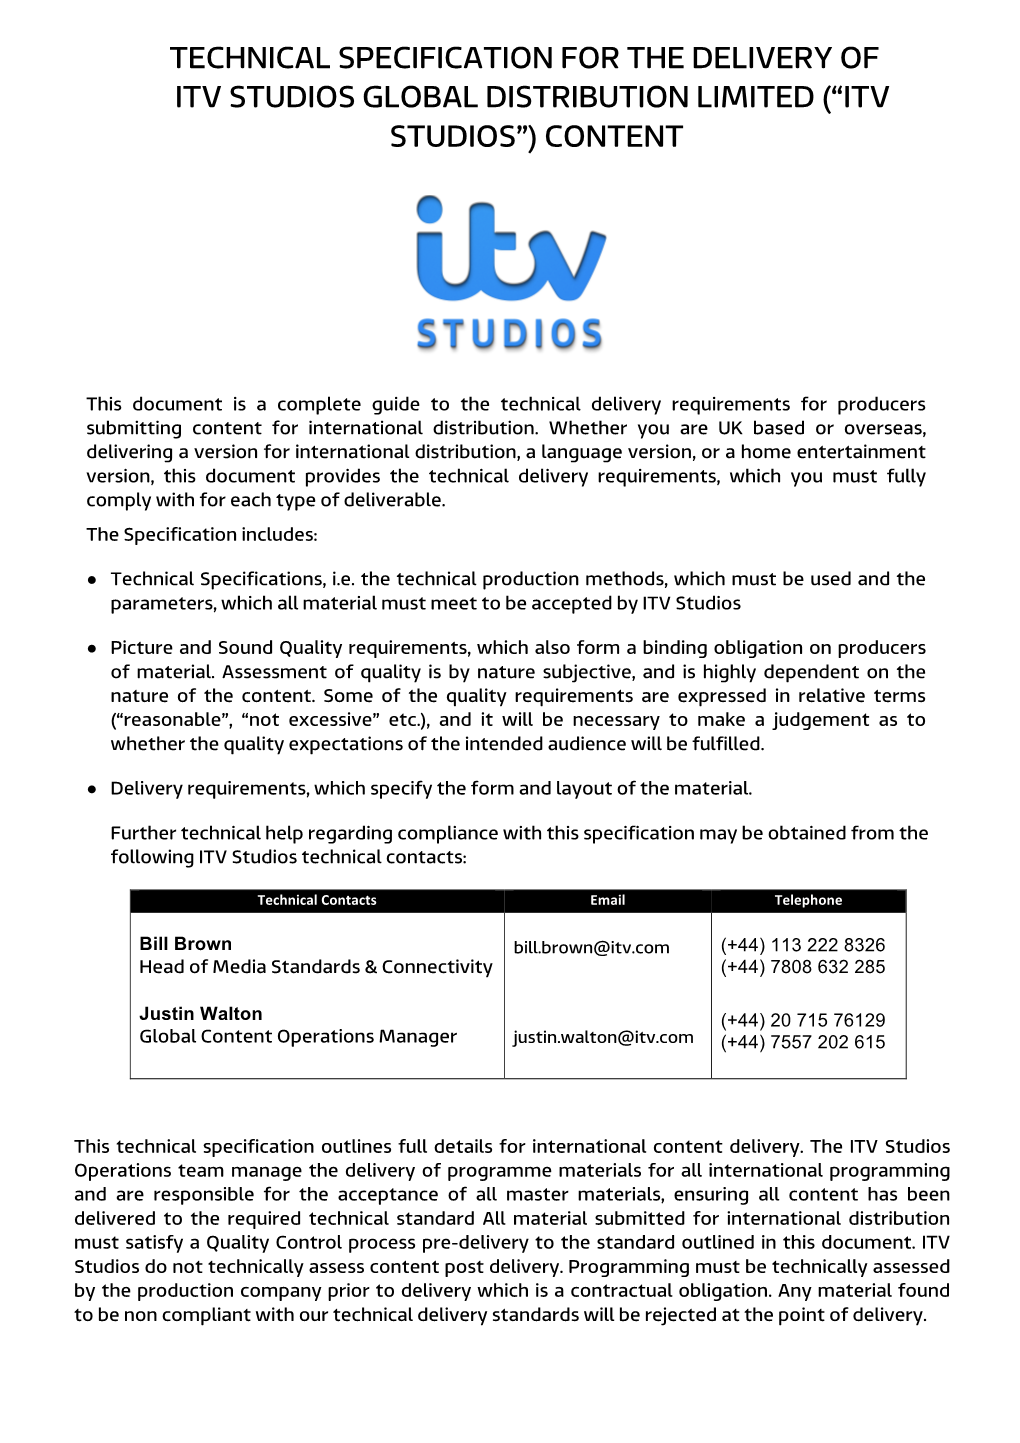 Technical Specification for the Delivery of Itv Studios Global Distribution Limited (“Itv Studios”) Content